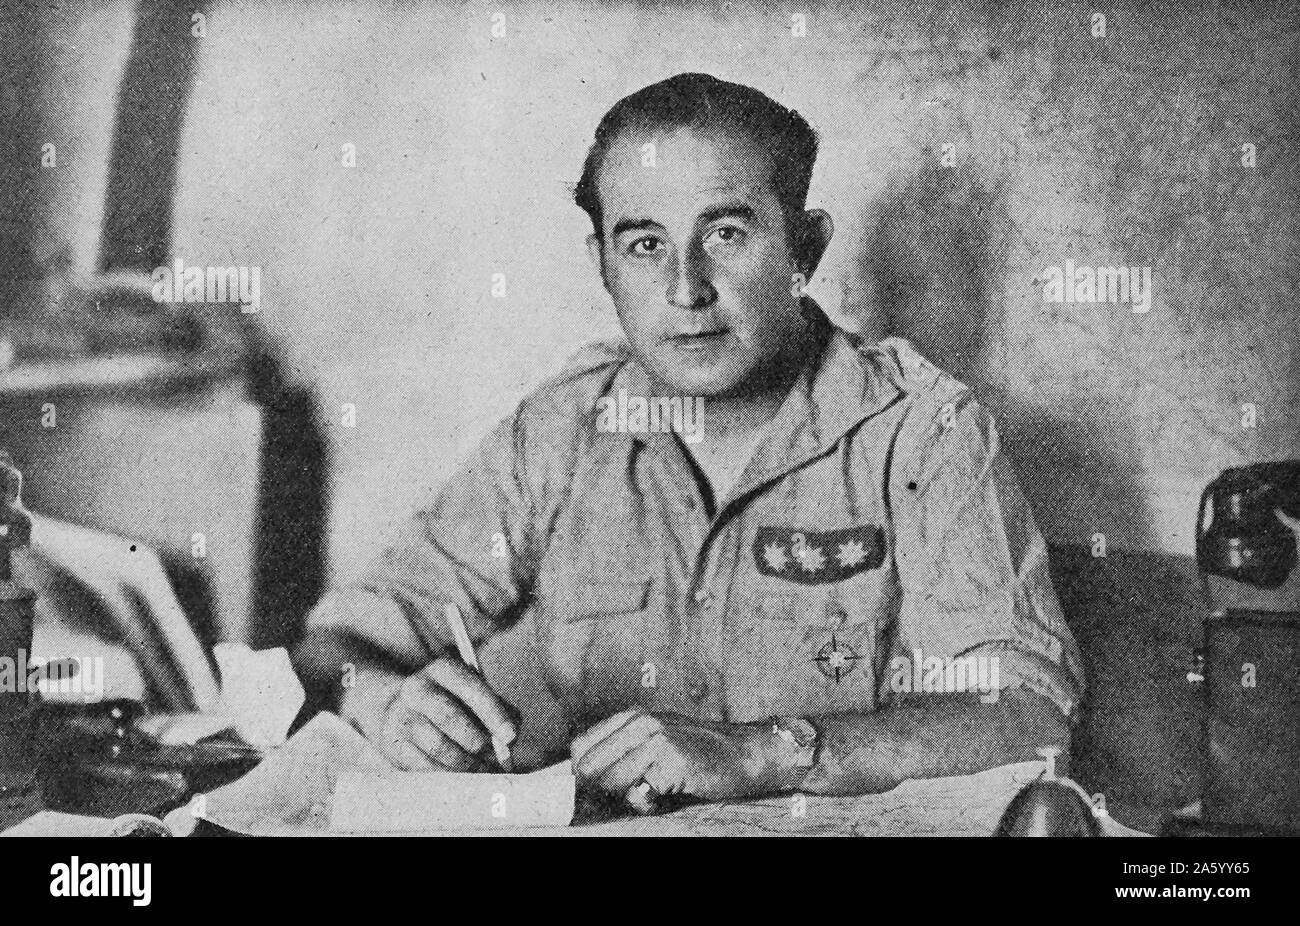 Francisco Garcia Escámez y Iniesta (1893 - 1951) Spanish soldier who was part of the uprising against the government of the Second Republic that led to the Civil War. Stock Photo